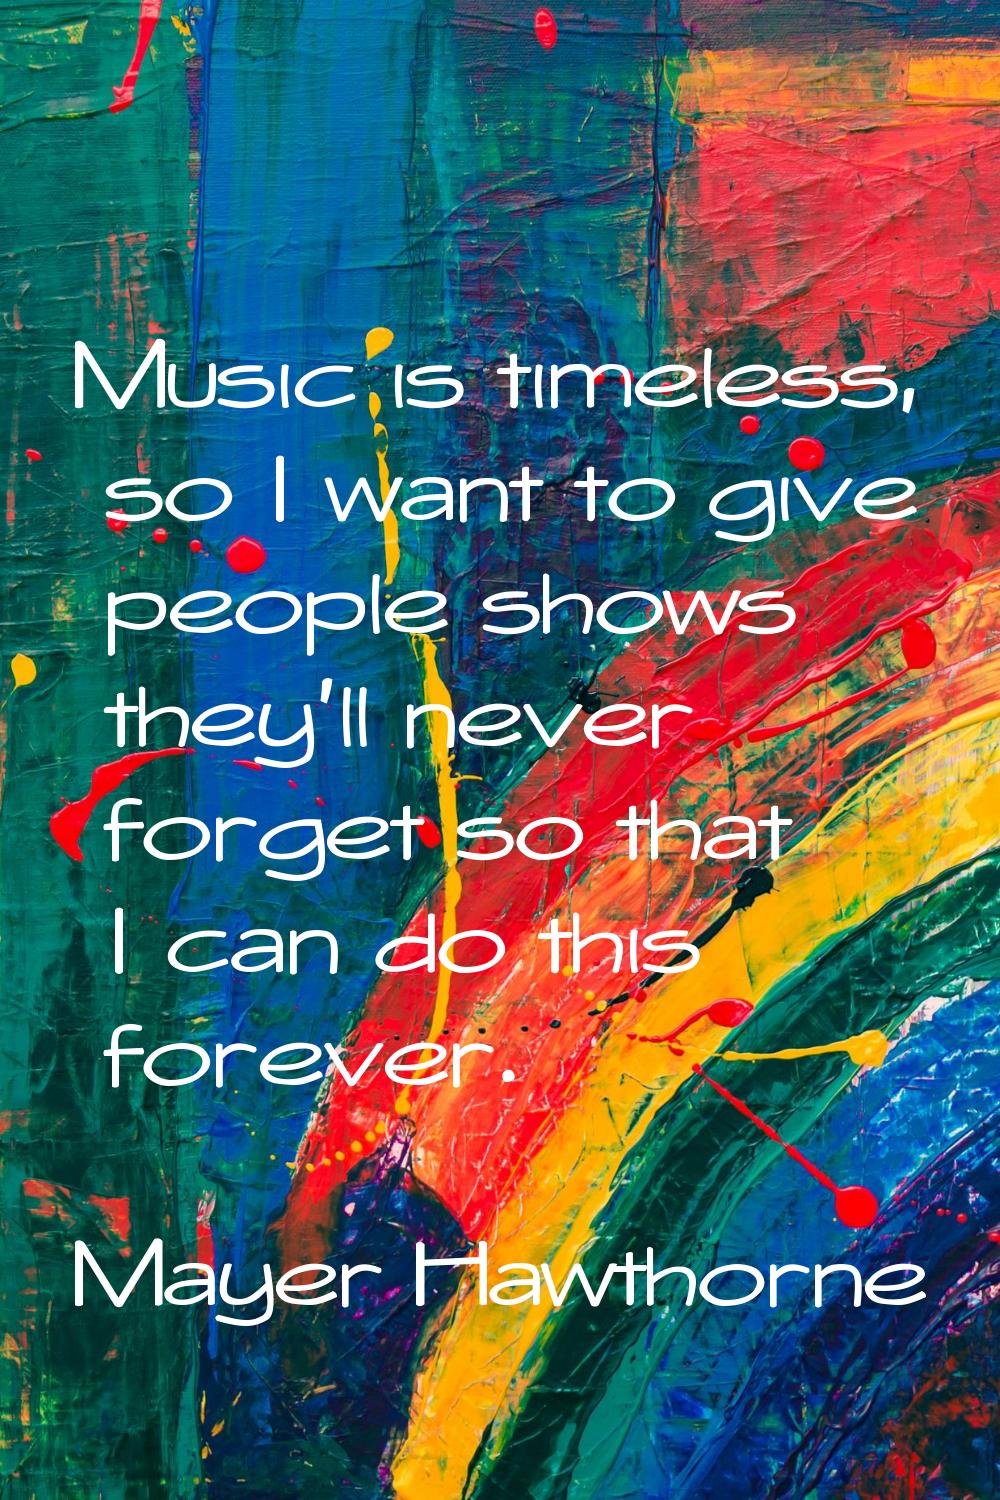 Music is timeless, so I want to give people shows they'll never forget so that I can do this foreve